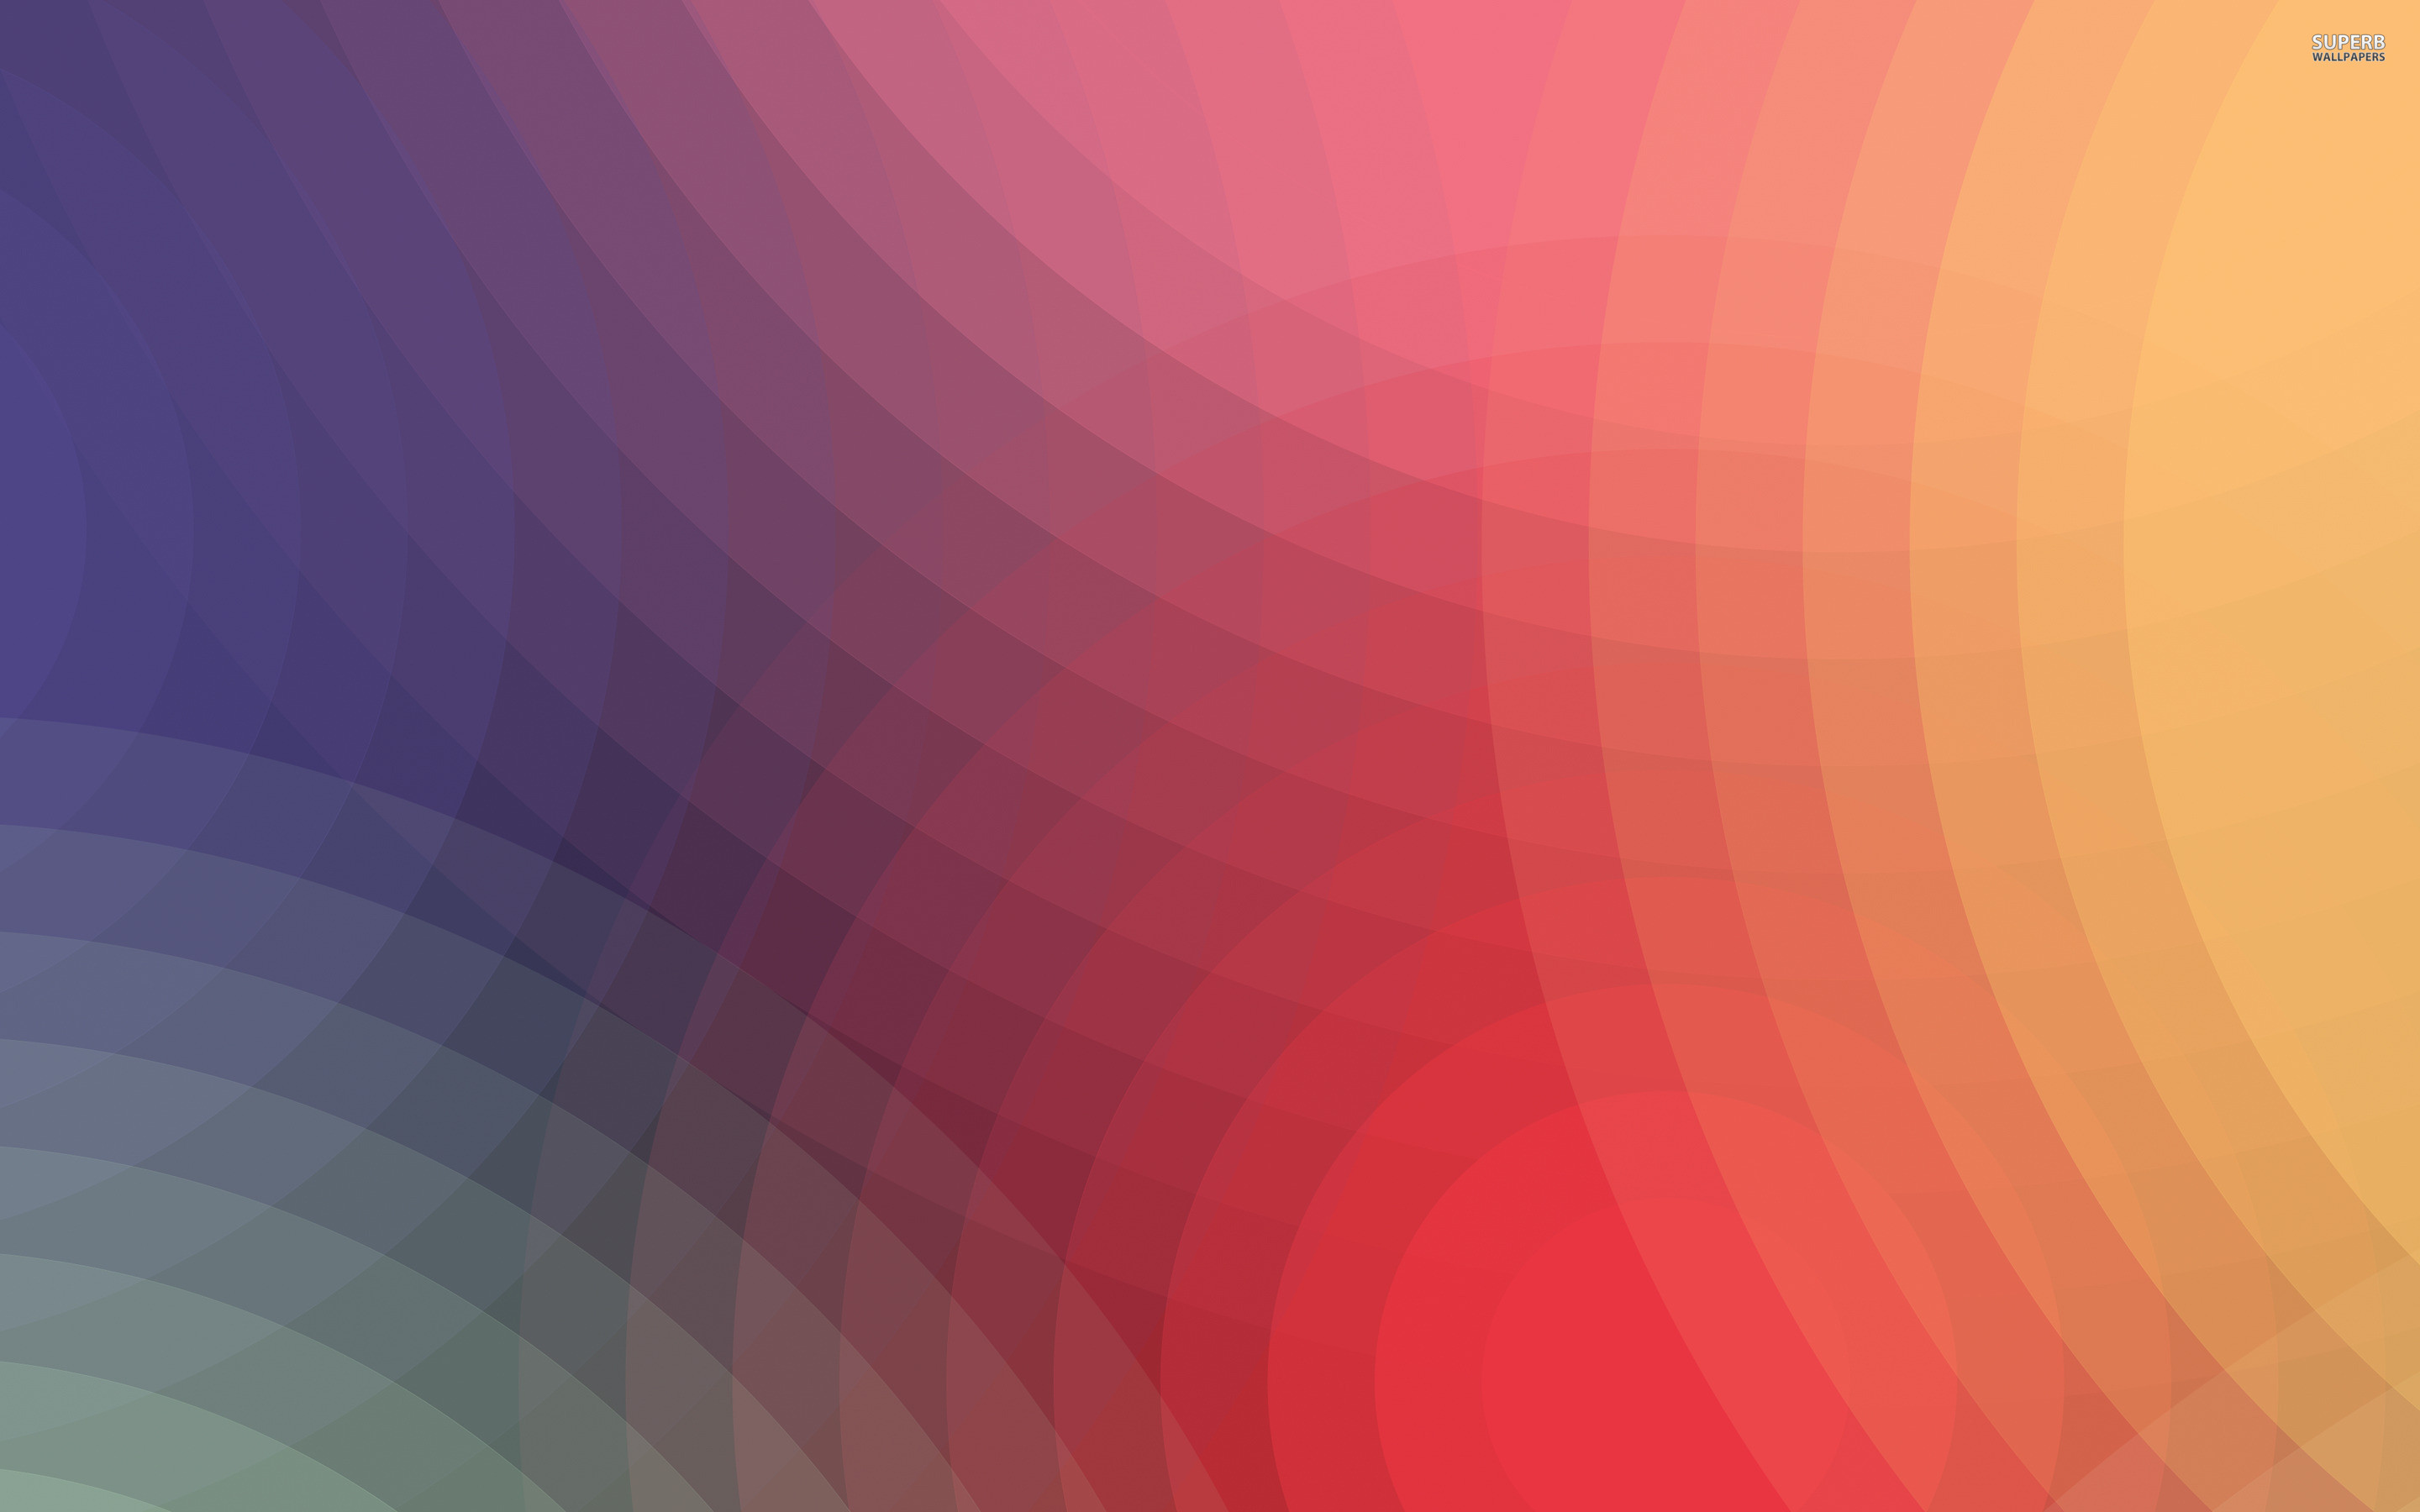 2880x1800 Rainbow colored circles : Desktop and mobile wallpaper : Wallippo